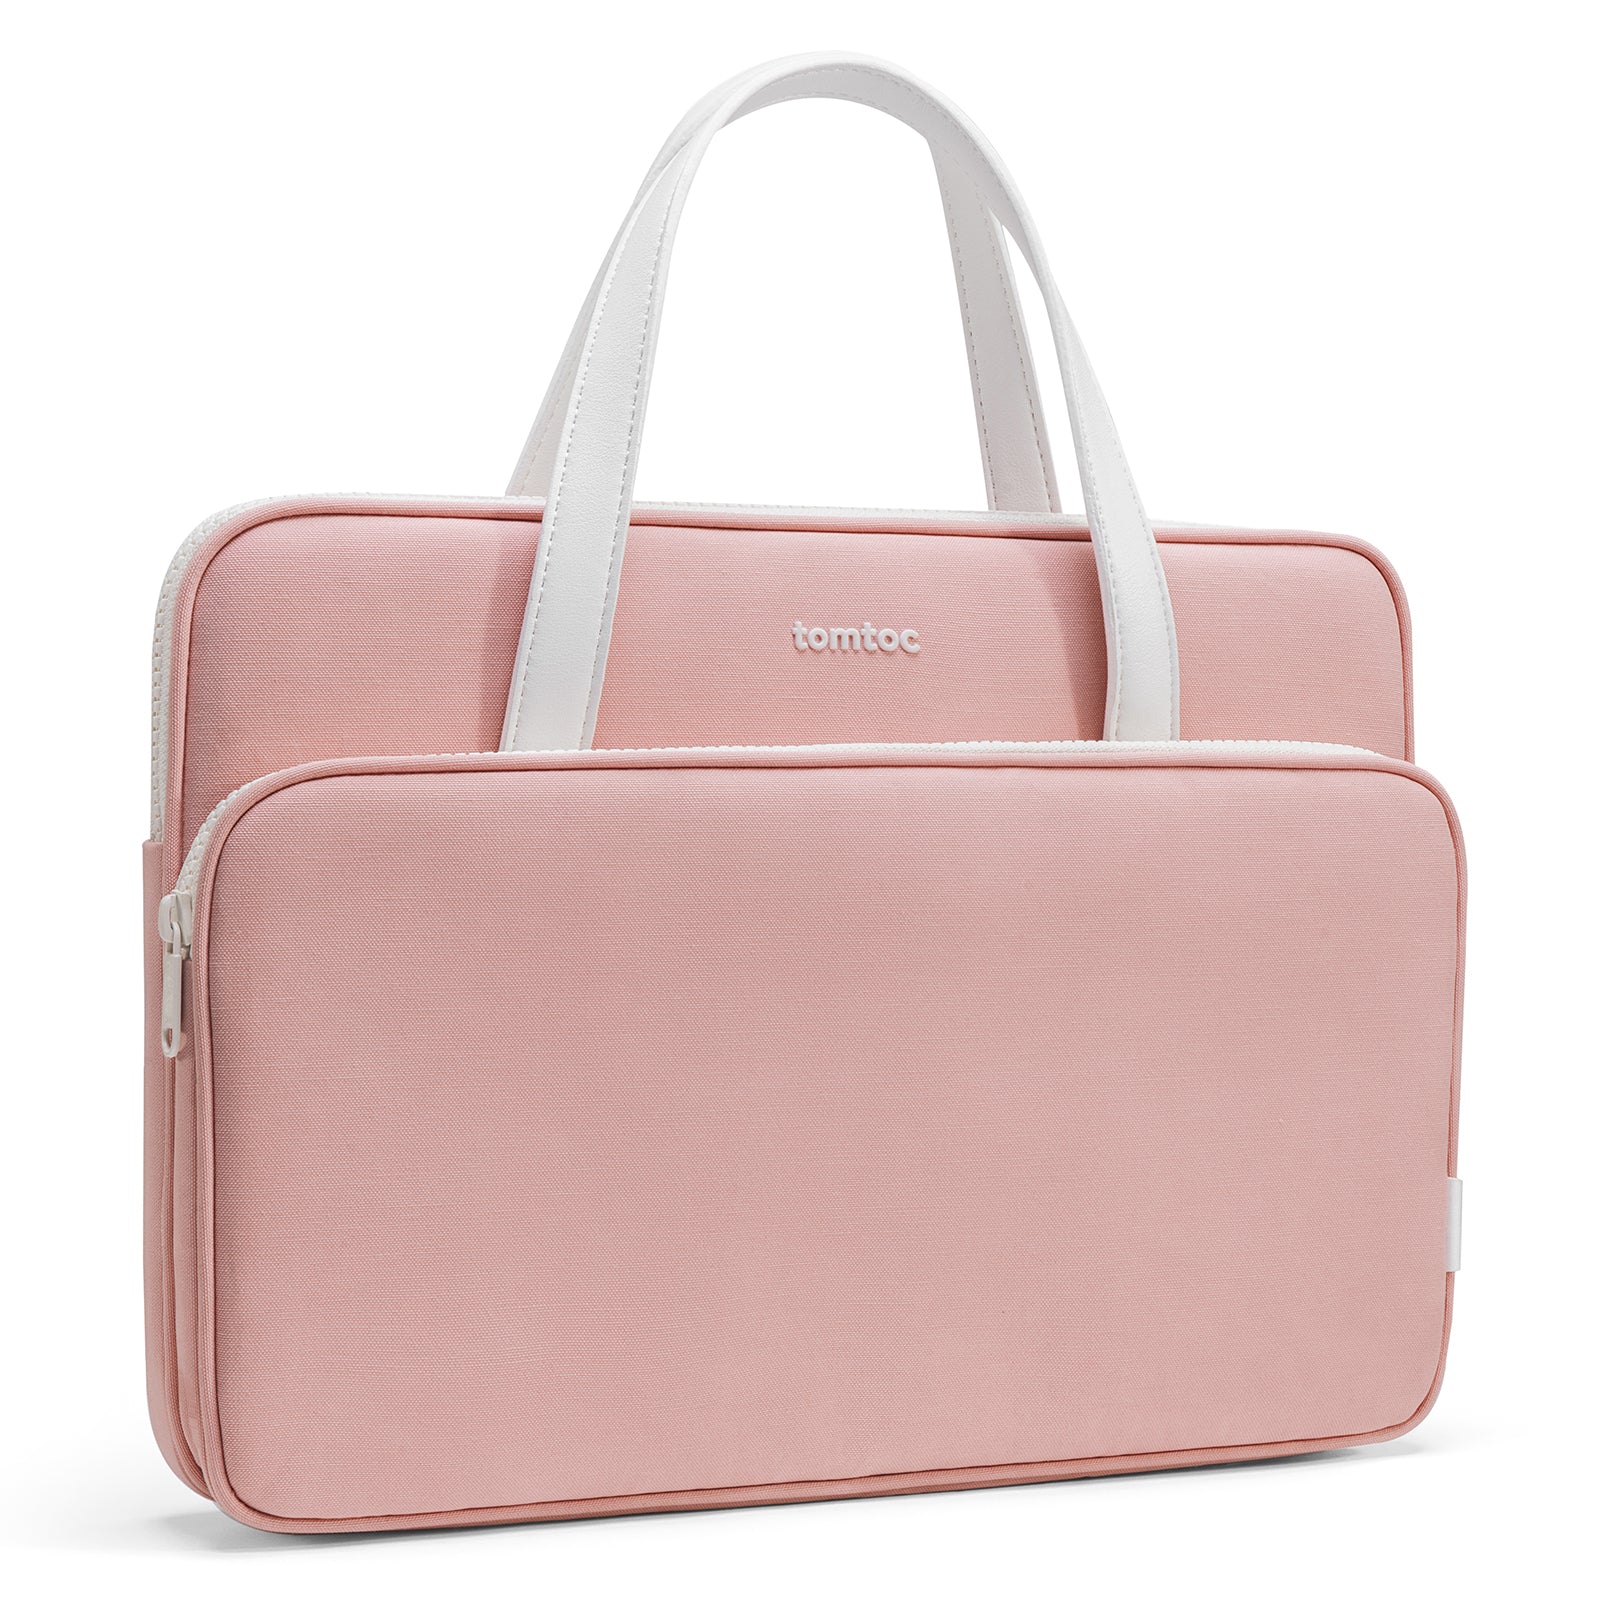 Tomtoc TheHer-H21 Laptop Handbag 14 inch - Pink